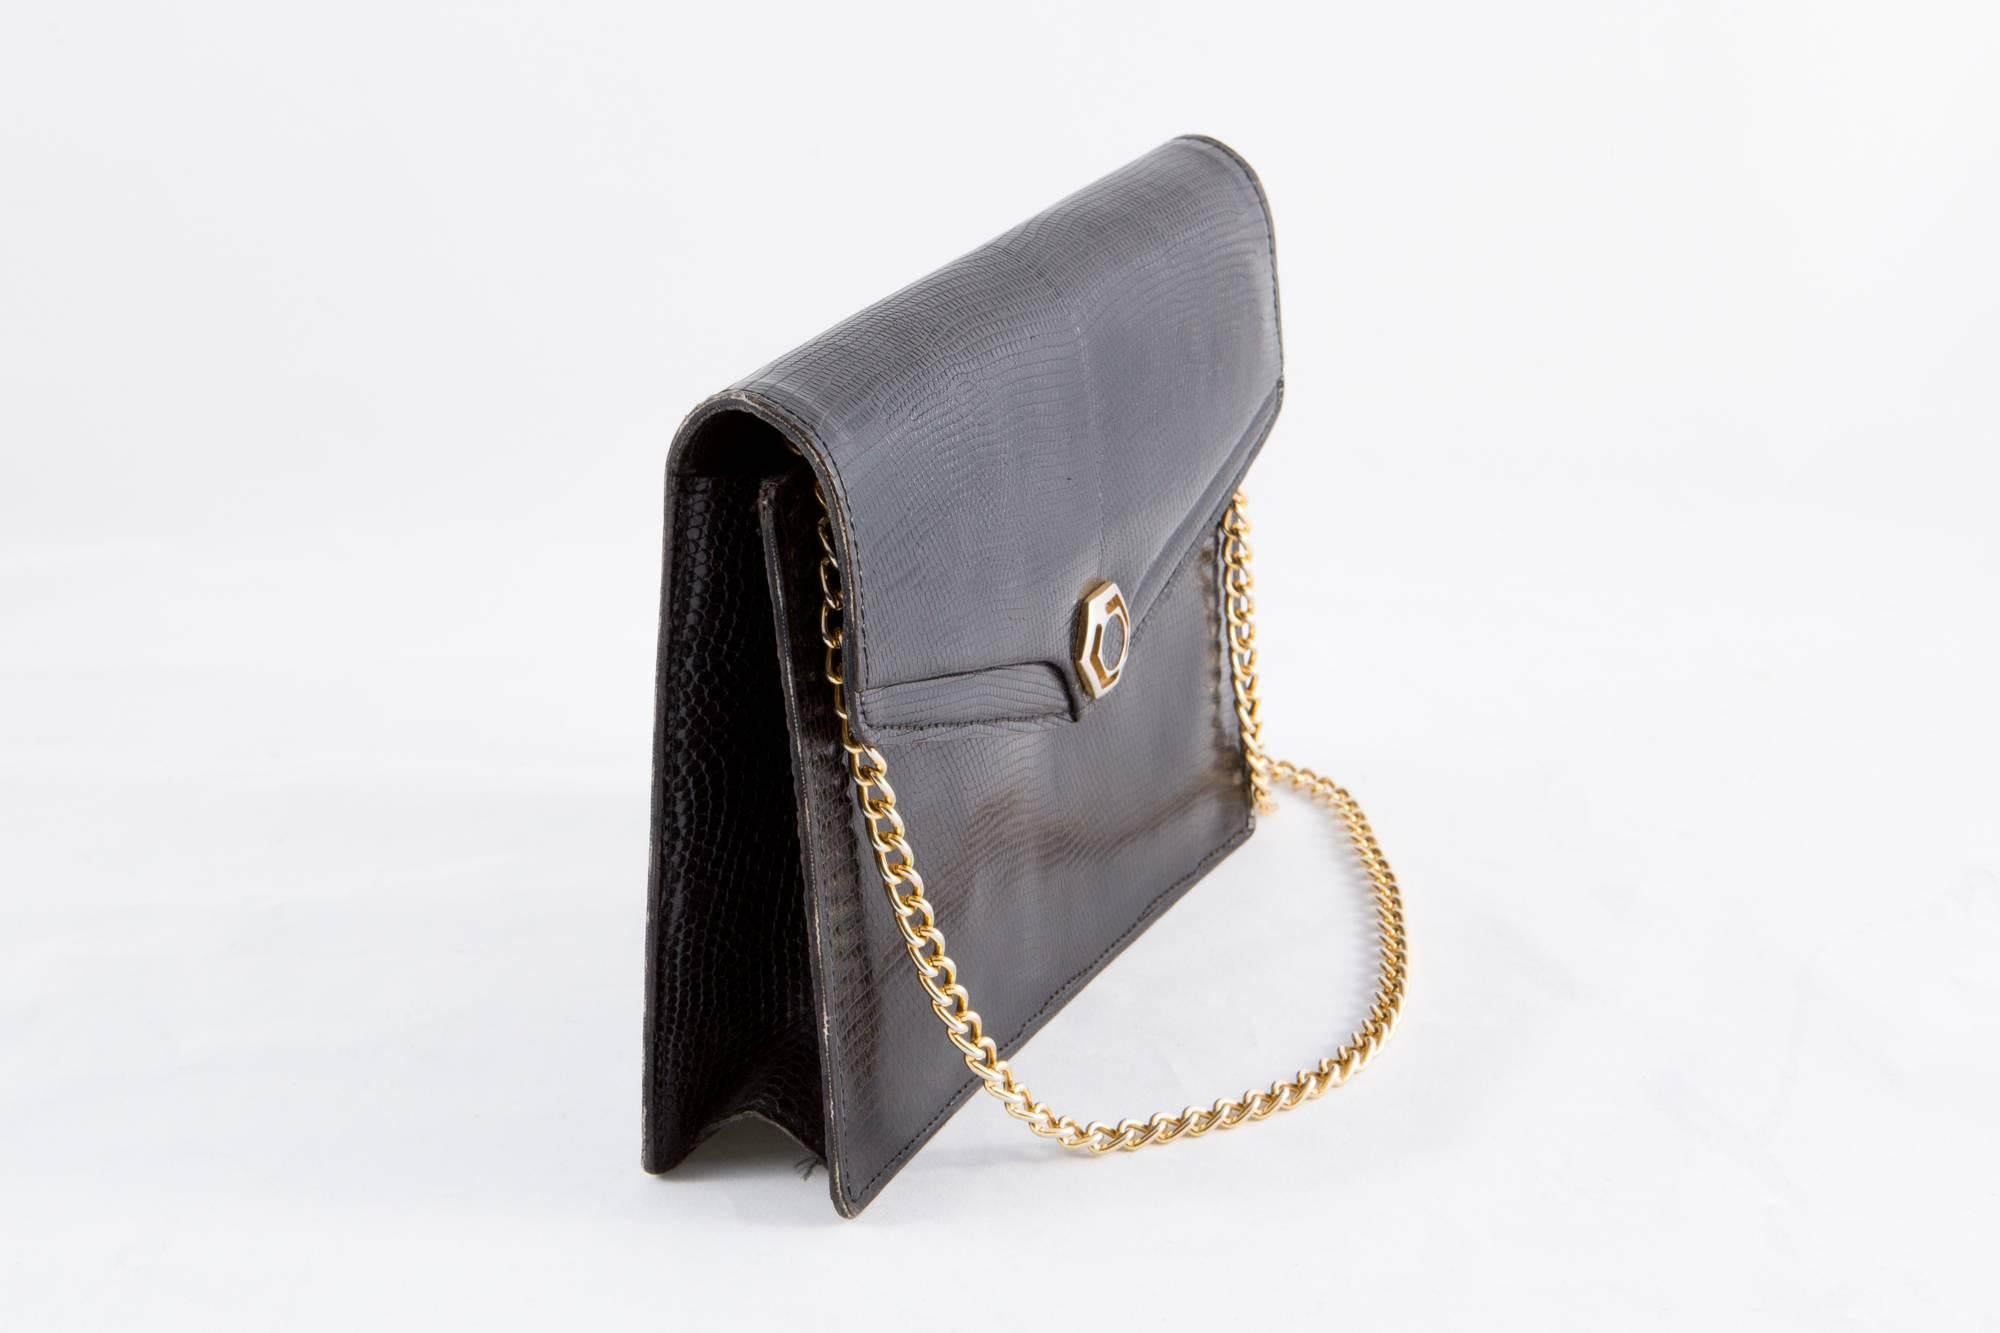 1960s black evening bag featuring a lizard effect leather outside, an inside black leather lining, a detachable gold tone shoulder chain, a front snap closure, inside 2 small pockets. 
In excellent vintage condition. Made in France.
Measurements: